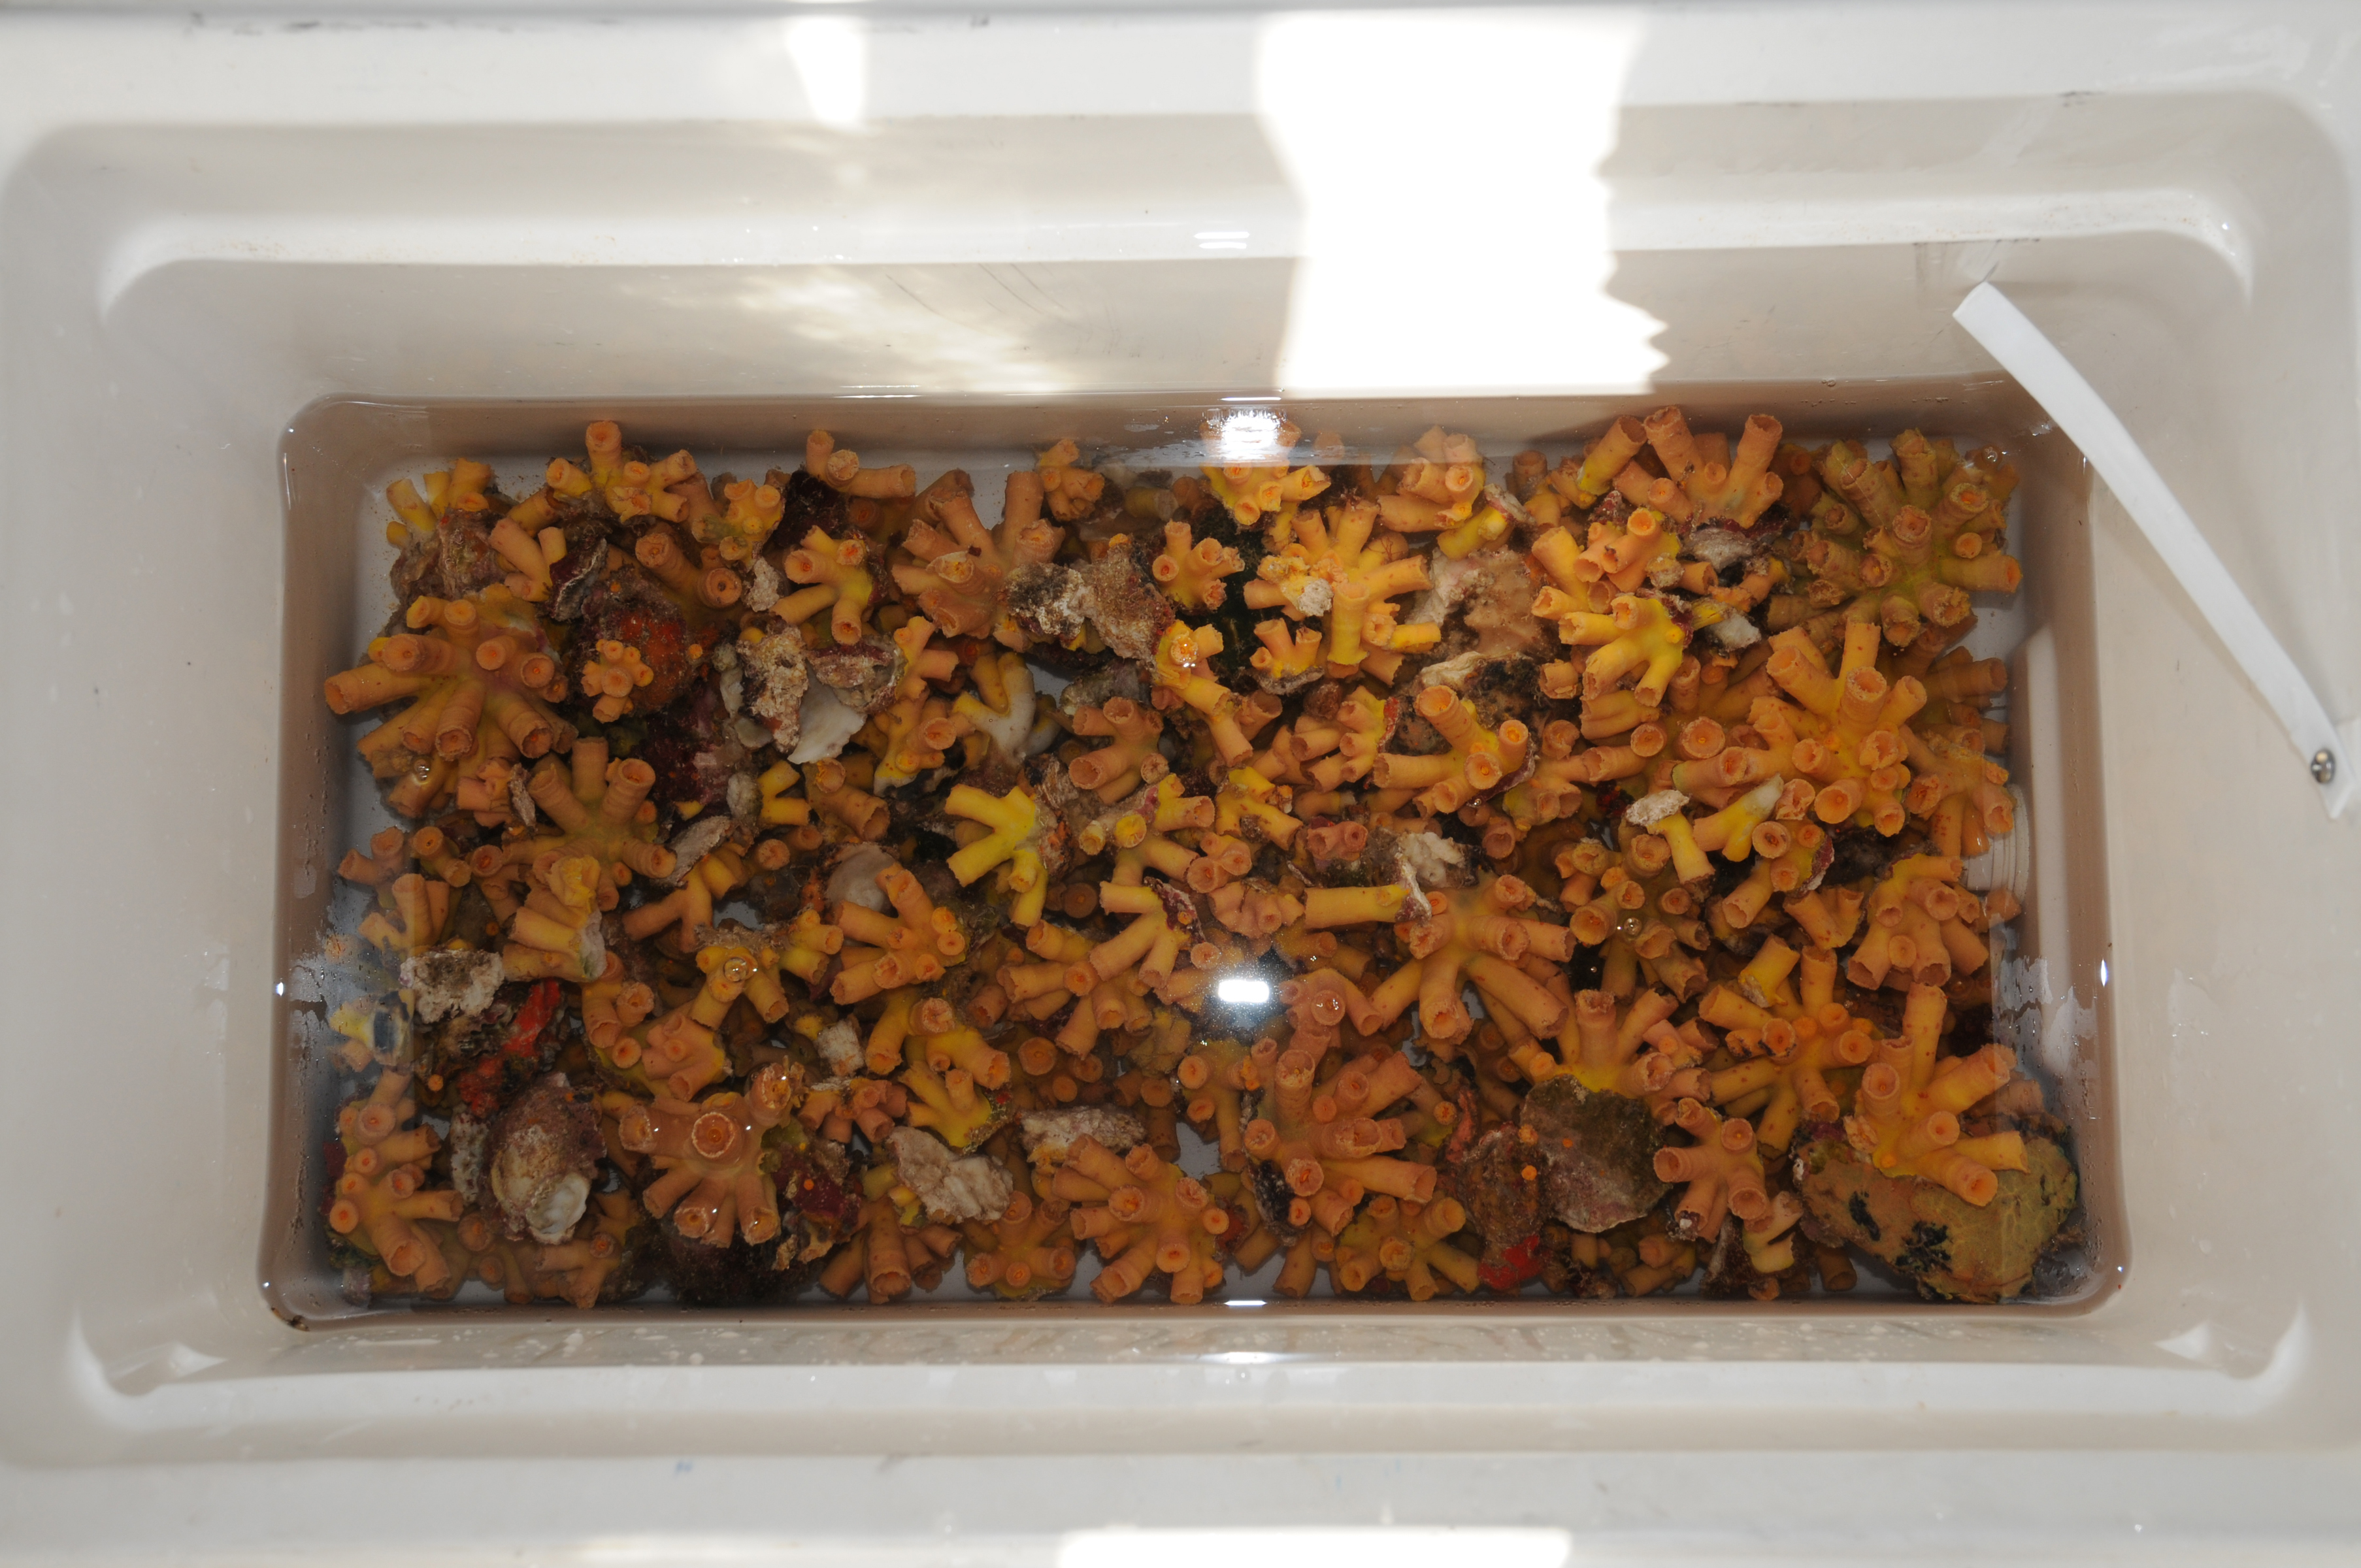 Hundreds of orange cup corals inside a cooler of seawater